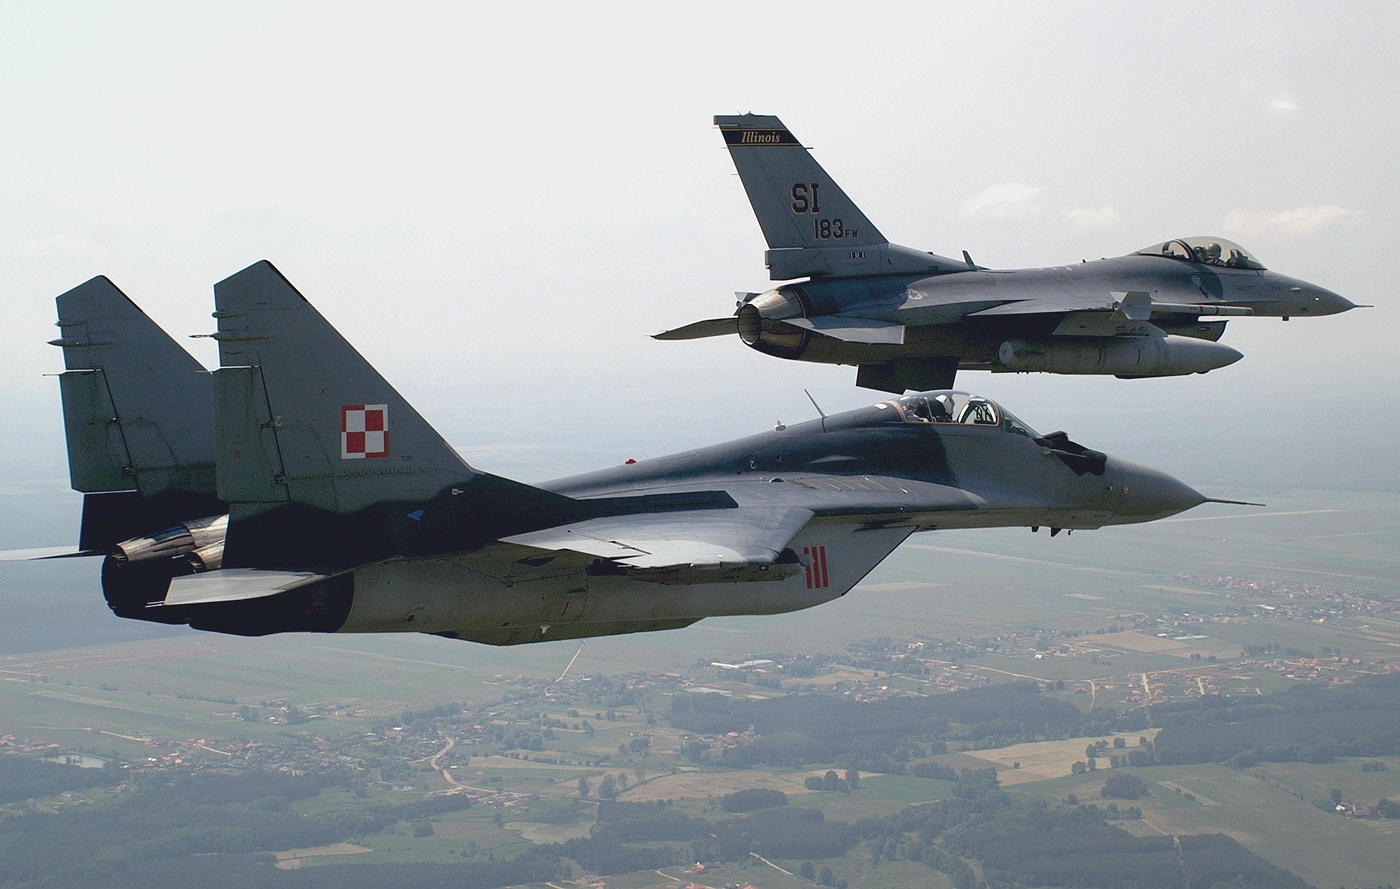 U.S._F-16C_Fighting_Falcon_and_Polish_Mikoyan-Gurevich_MiG-29A_over_Krzesiny_air_base%2C_Poland_-_20050615.jpg